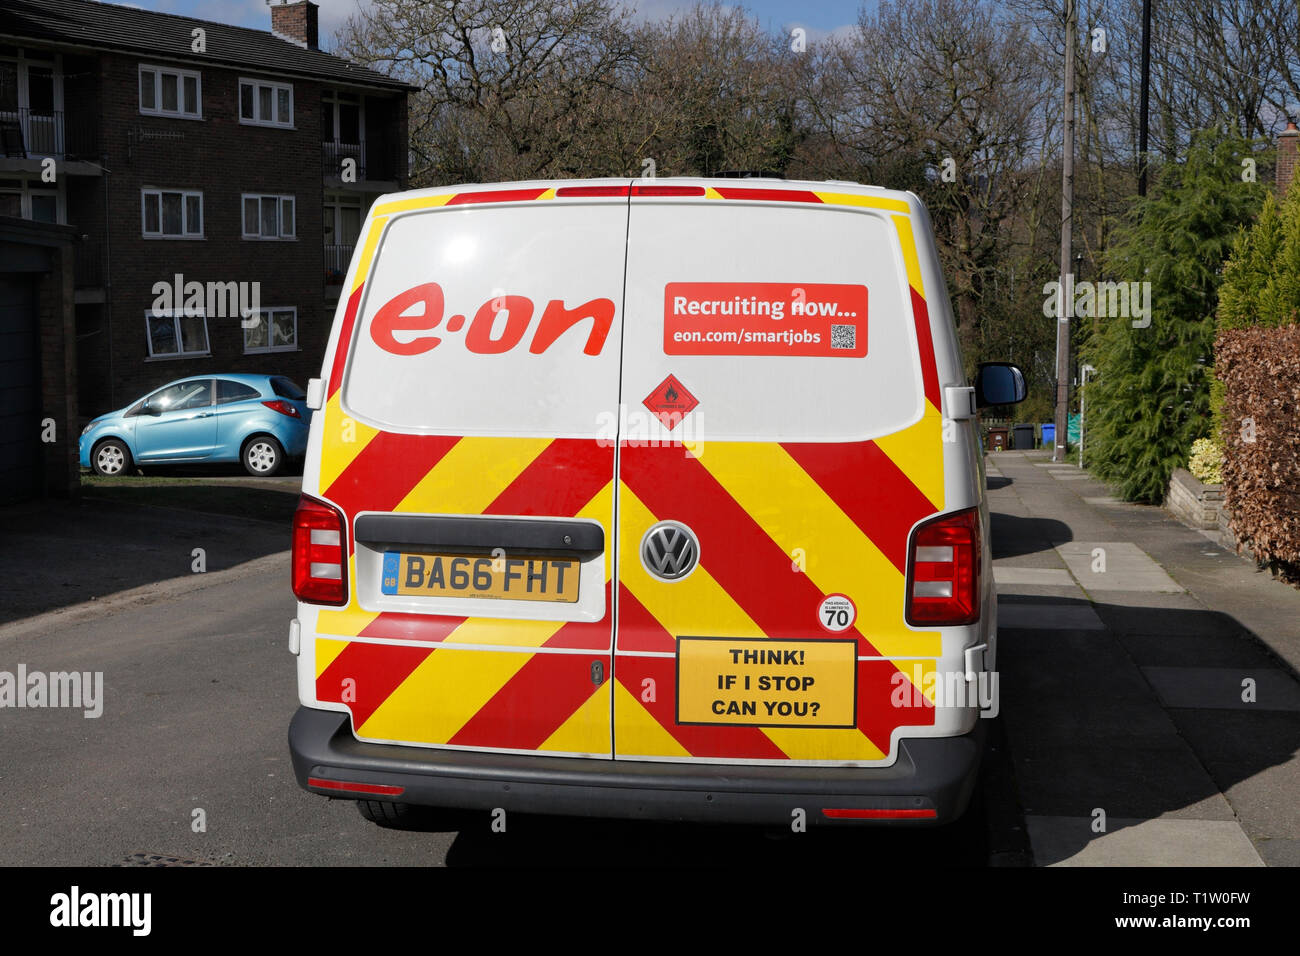 Back of e-on van, red and yellow chevrons on rear of vehicle Stock Photo